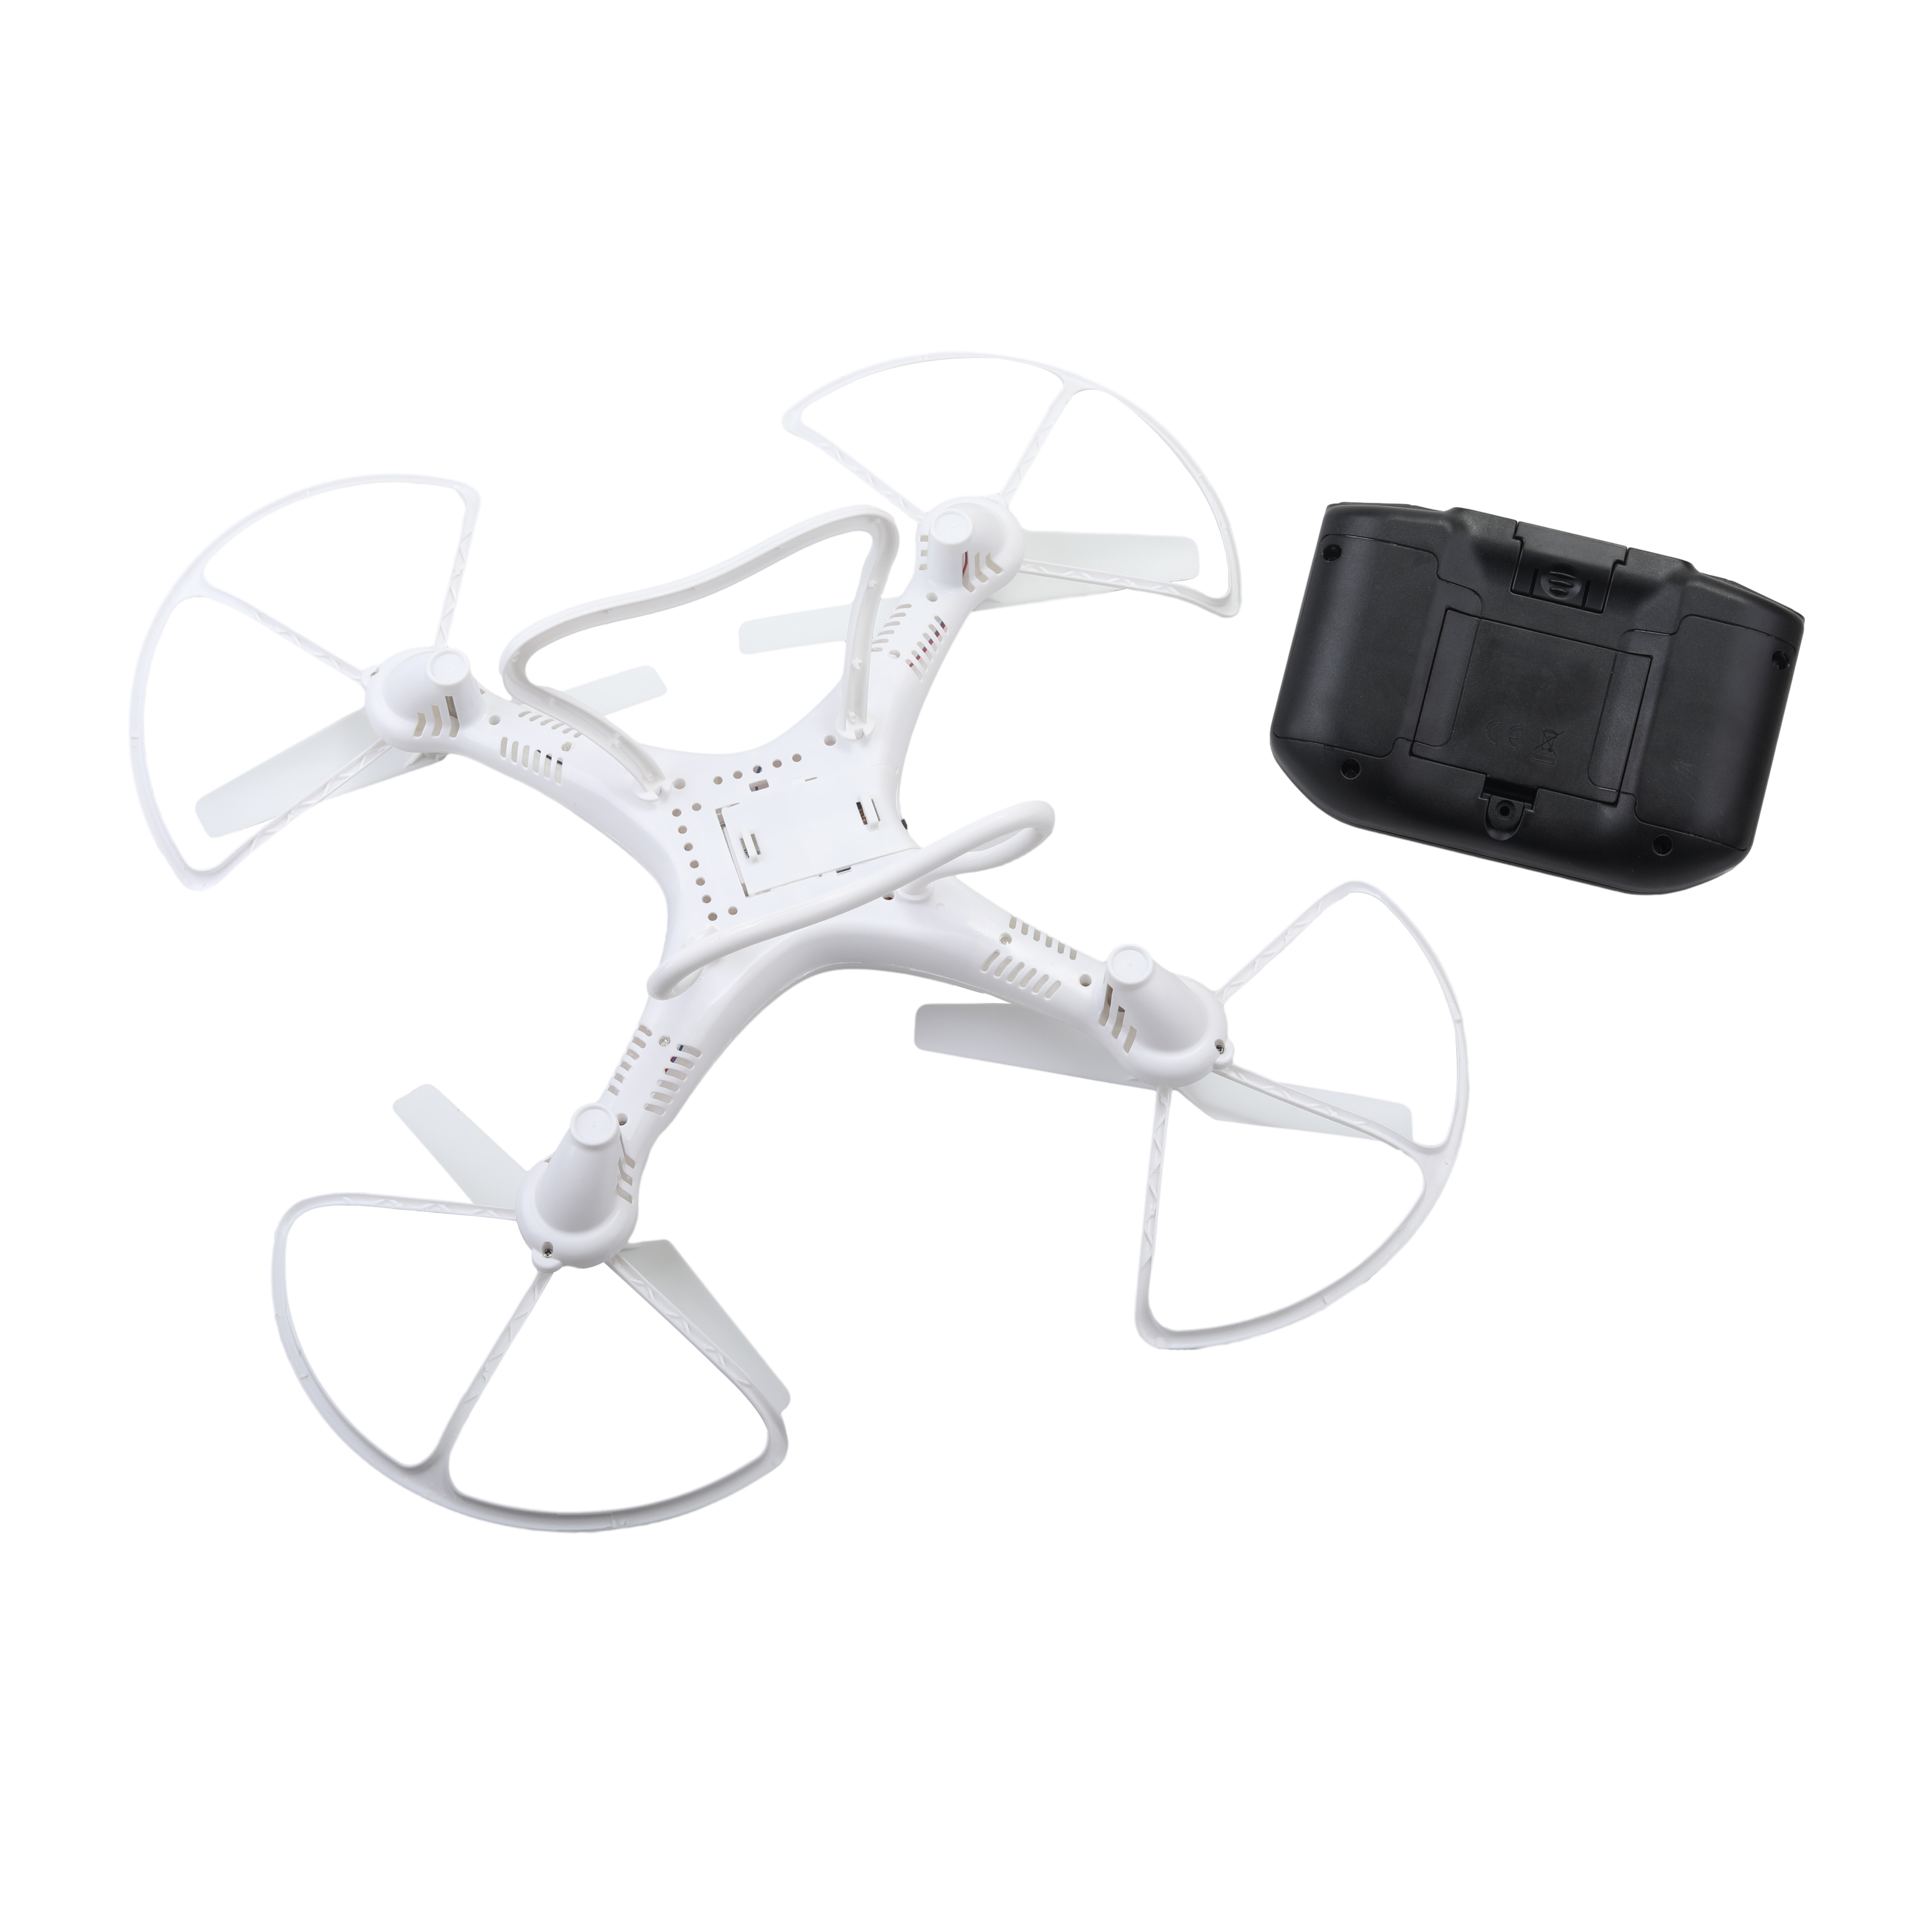 LUCKY CROWN toy drone, Remote Control Quadcopter Remote Control Toy Drone for Boys Girls